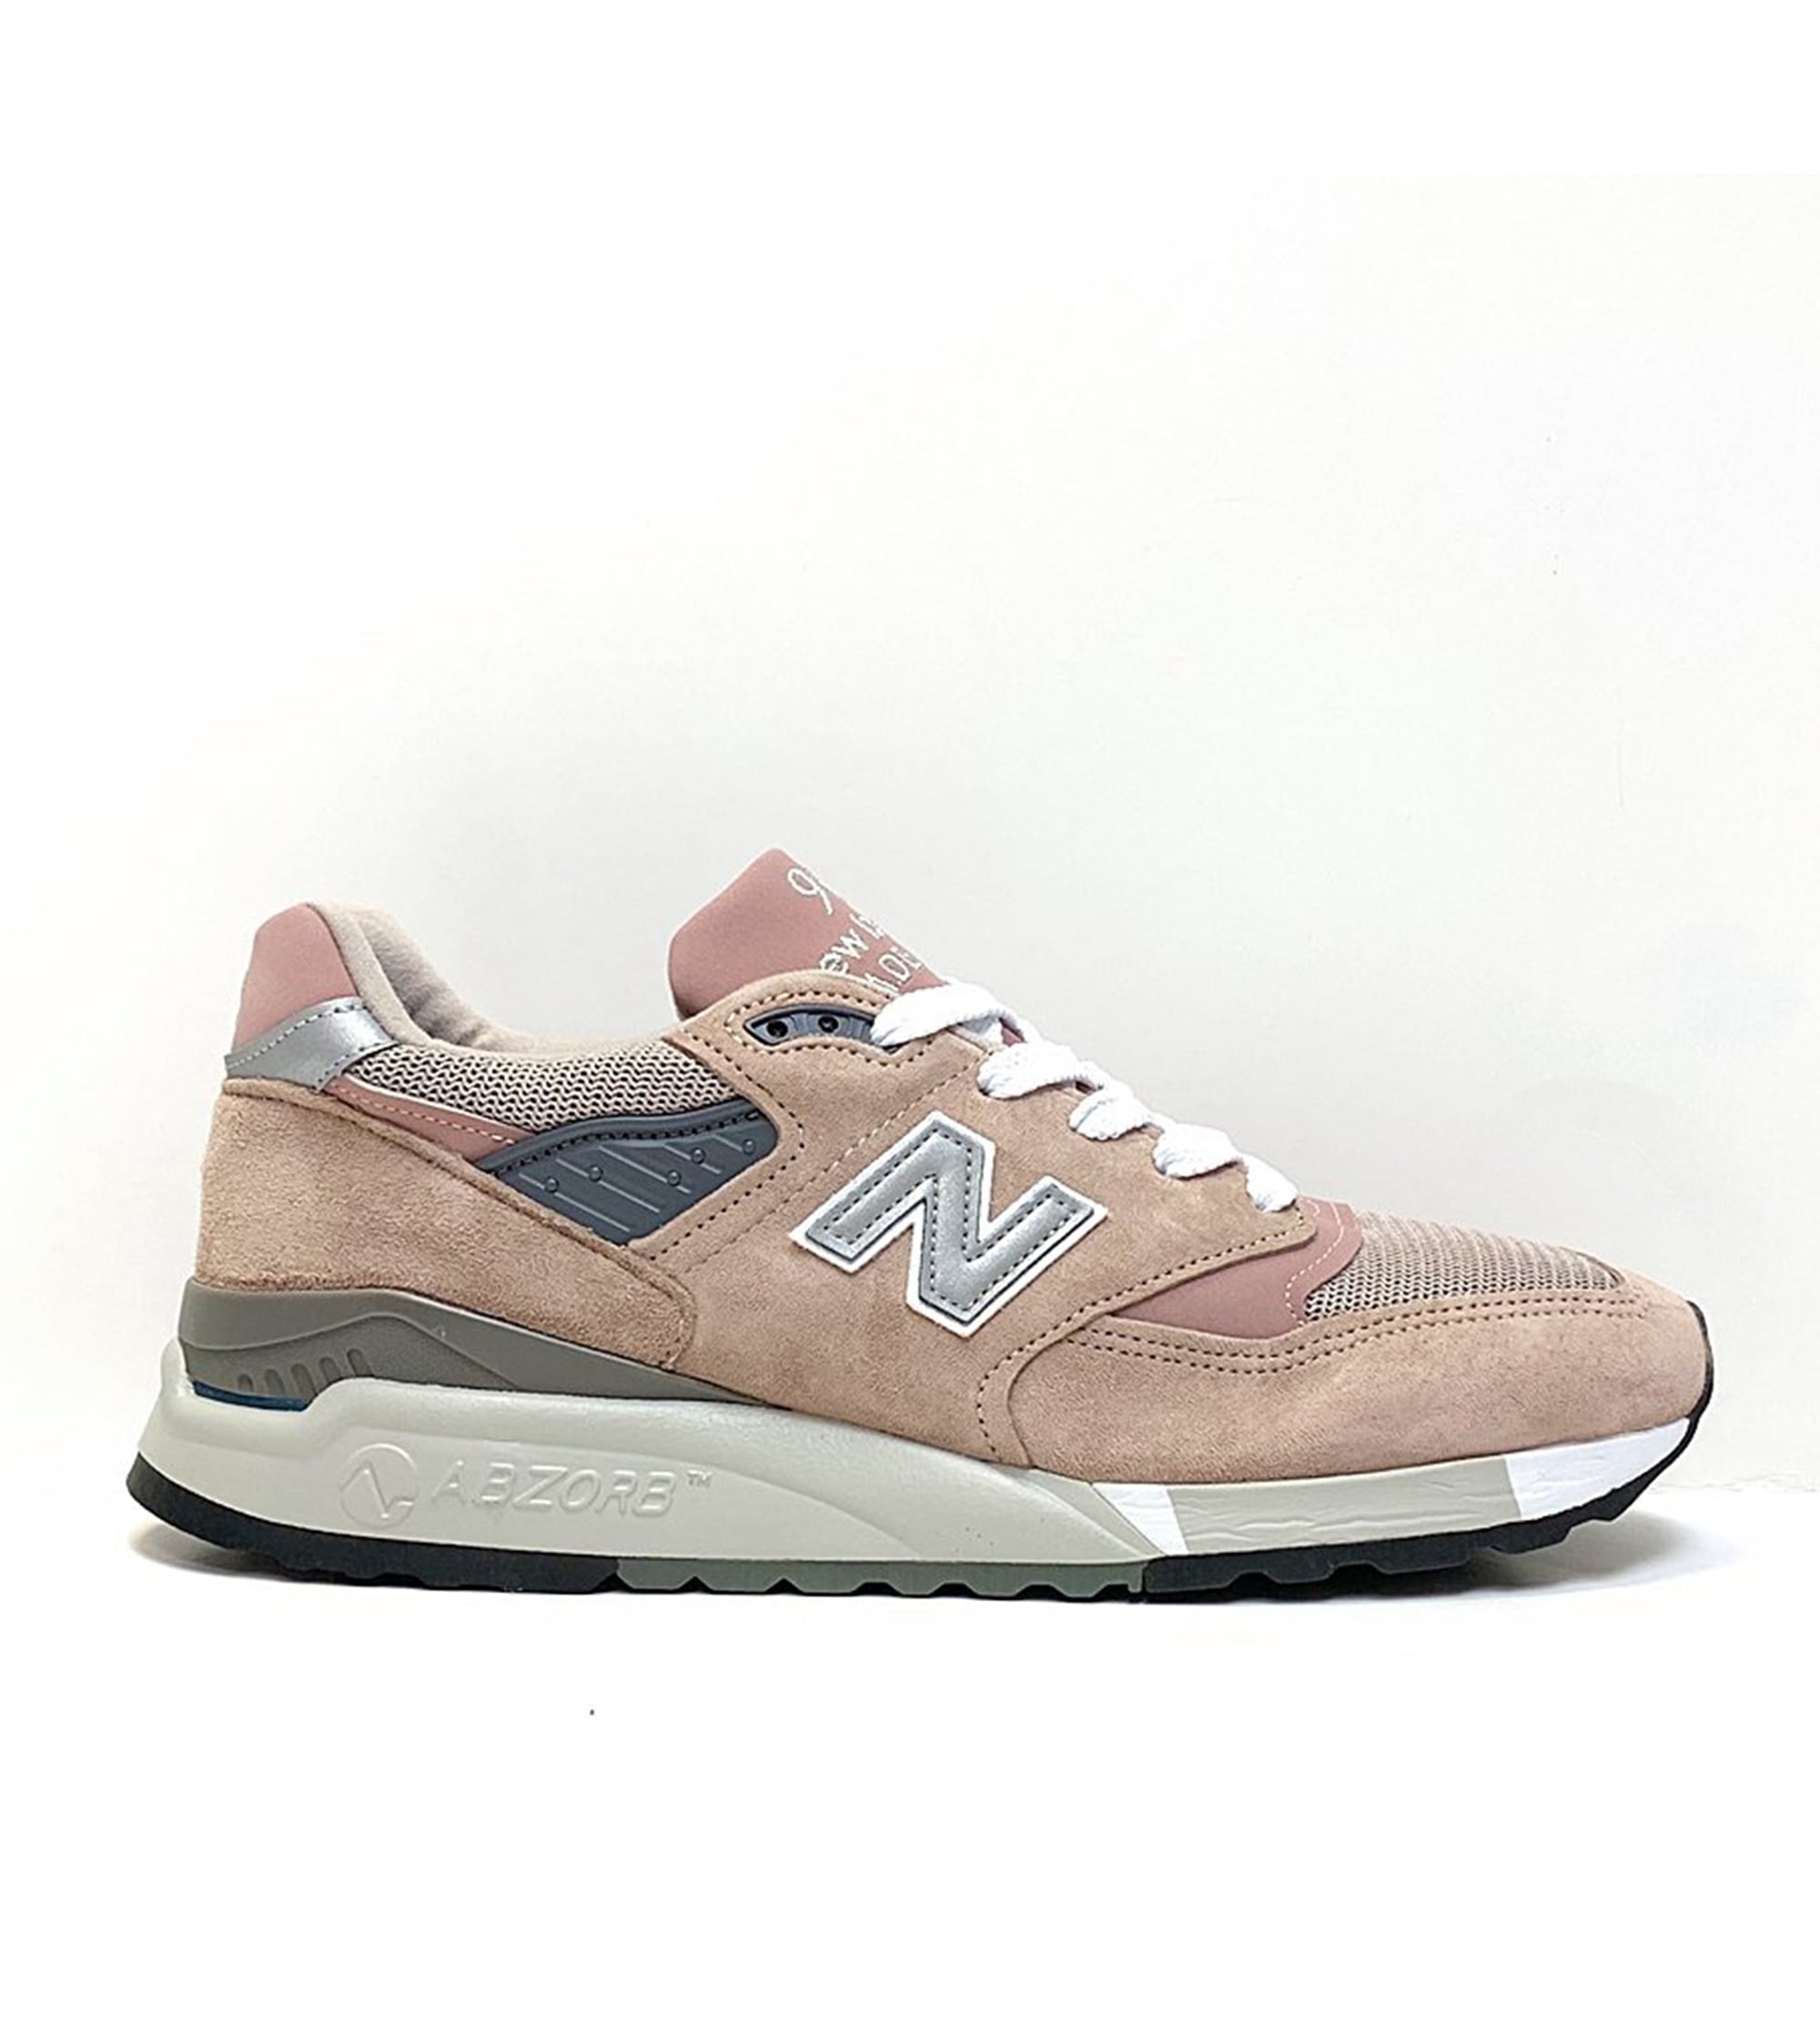 KITH x New Balance 998 (Dusty Rose) | Yellow Sneakers NYC